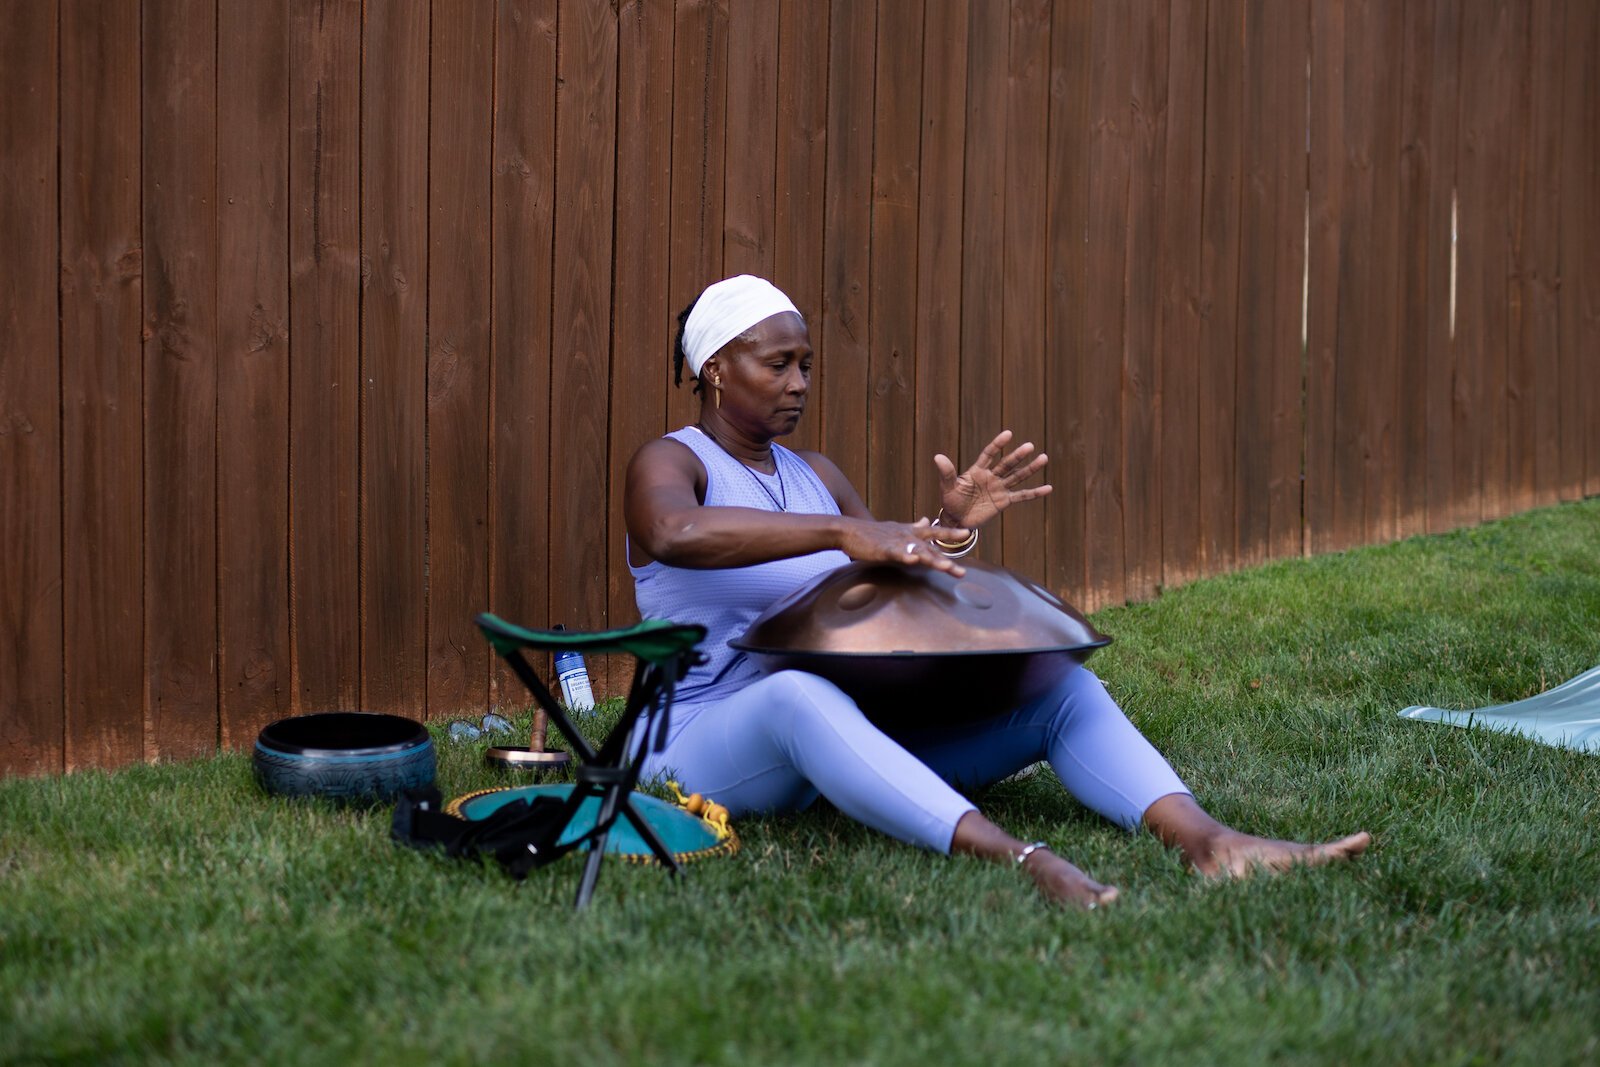 Diane Rogers of Rooted Connection, LLC, ushers participants into and out of the experience with her melodic 432 frequency handpan, or hang, drum.